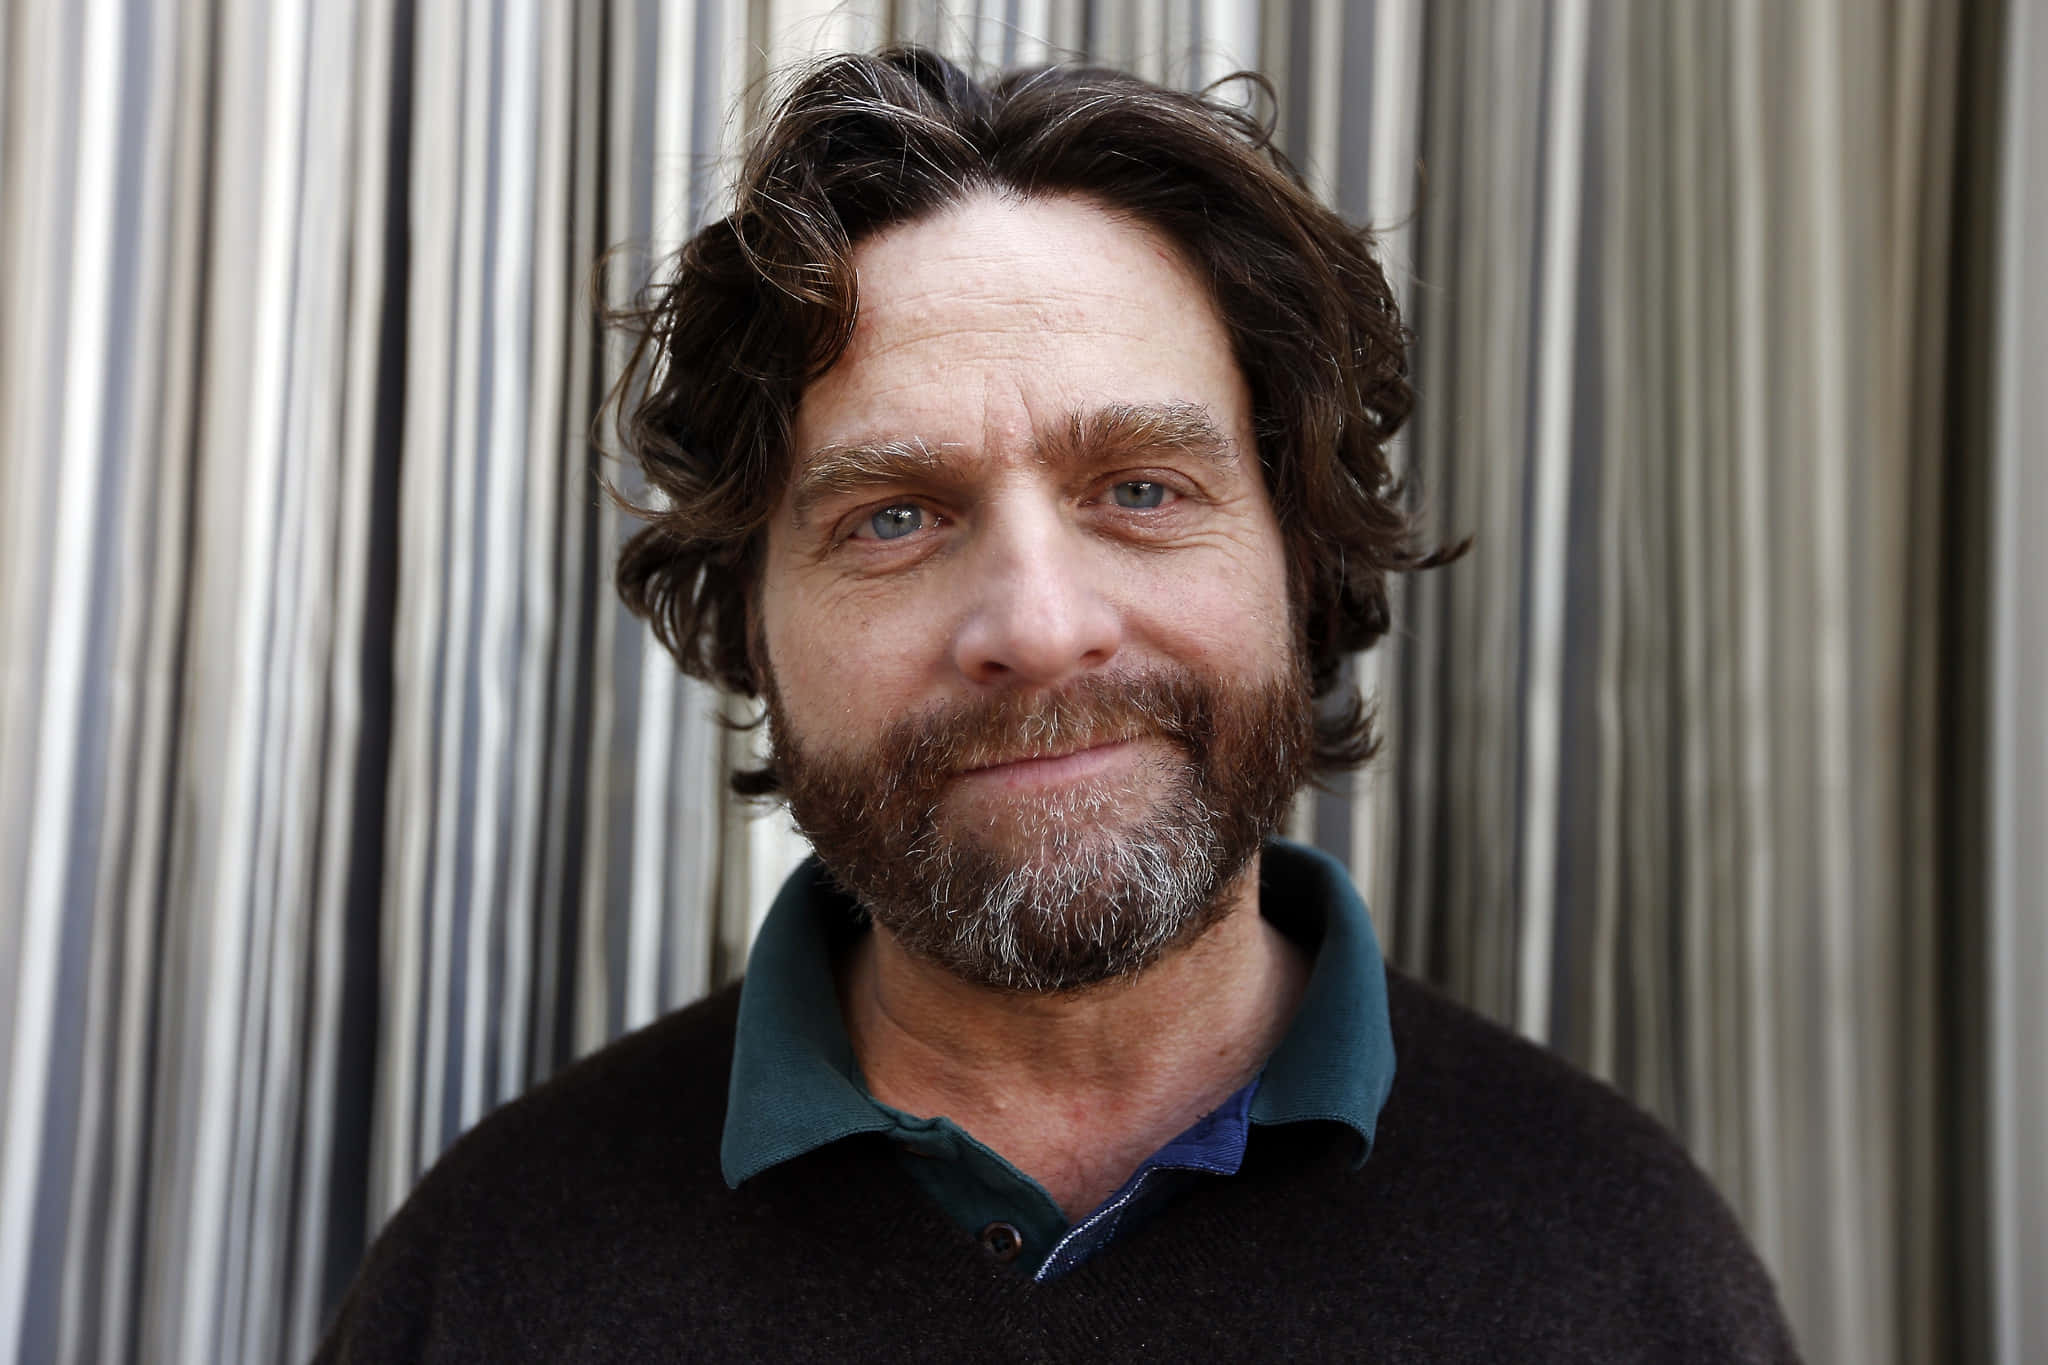 Zach Galifianakis looking to the side while holding a cup of coffee Wallpaper